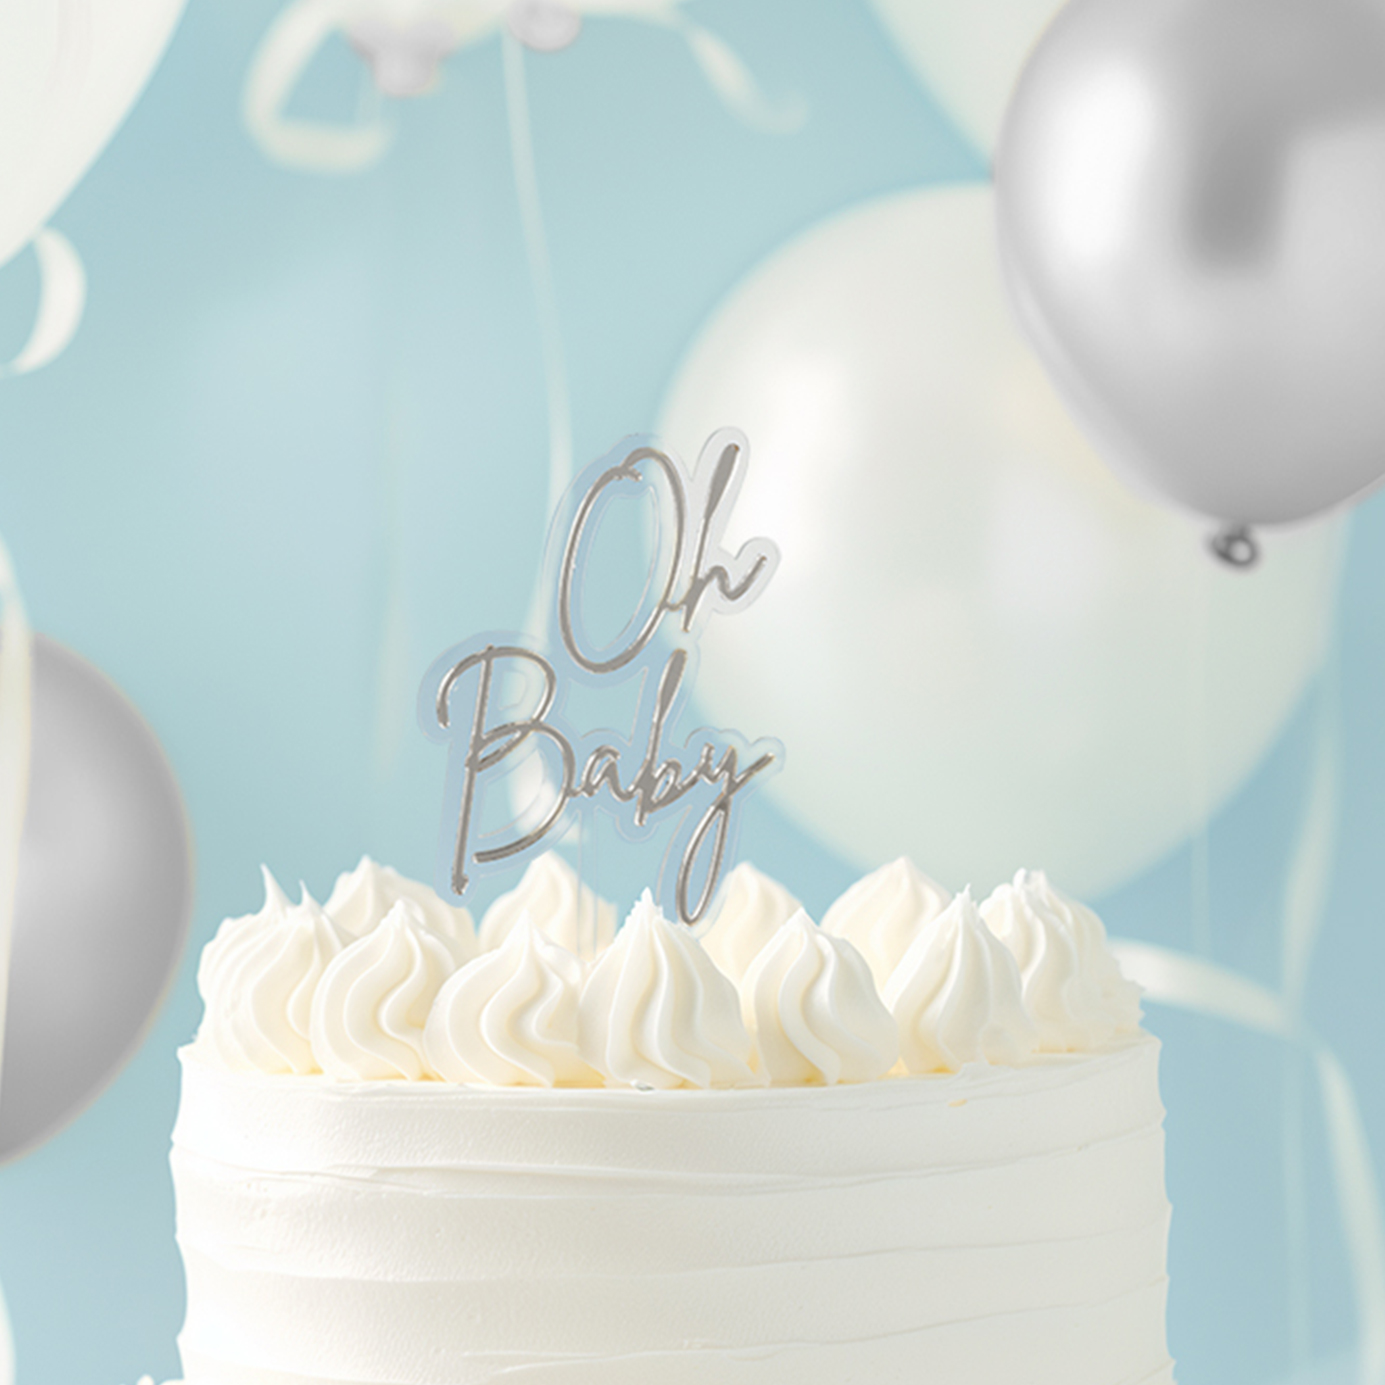 SILVER / CLEAR Layered Cake Topper - OH BABY